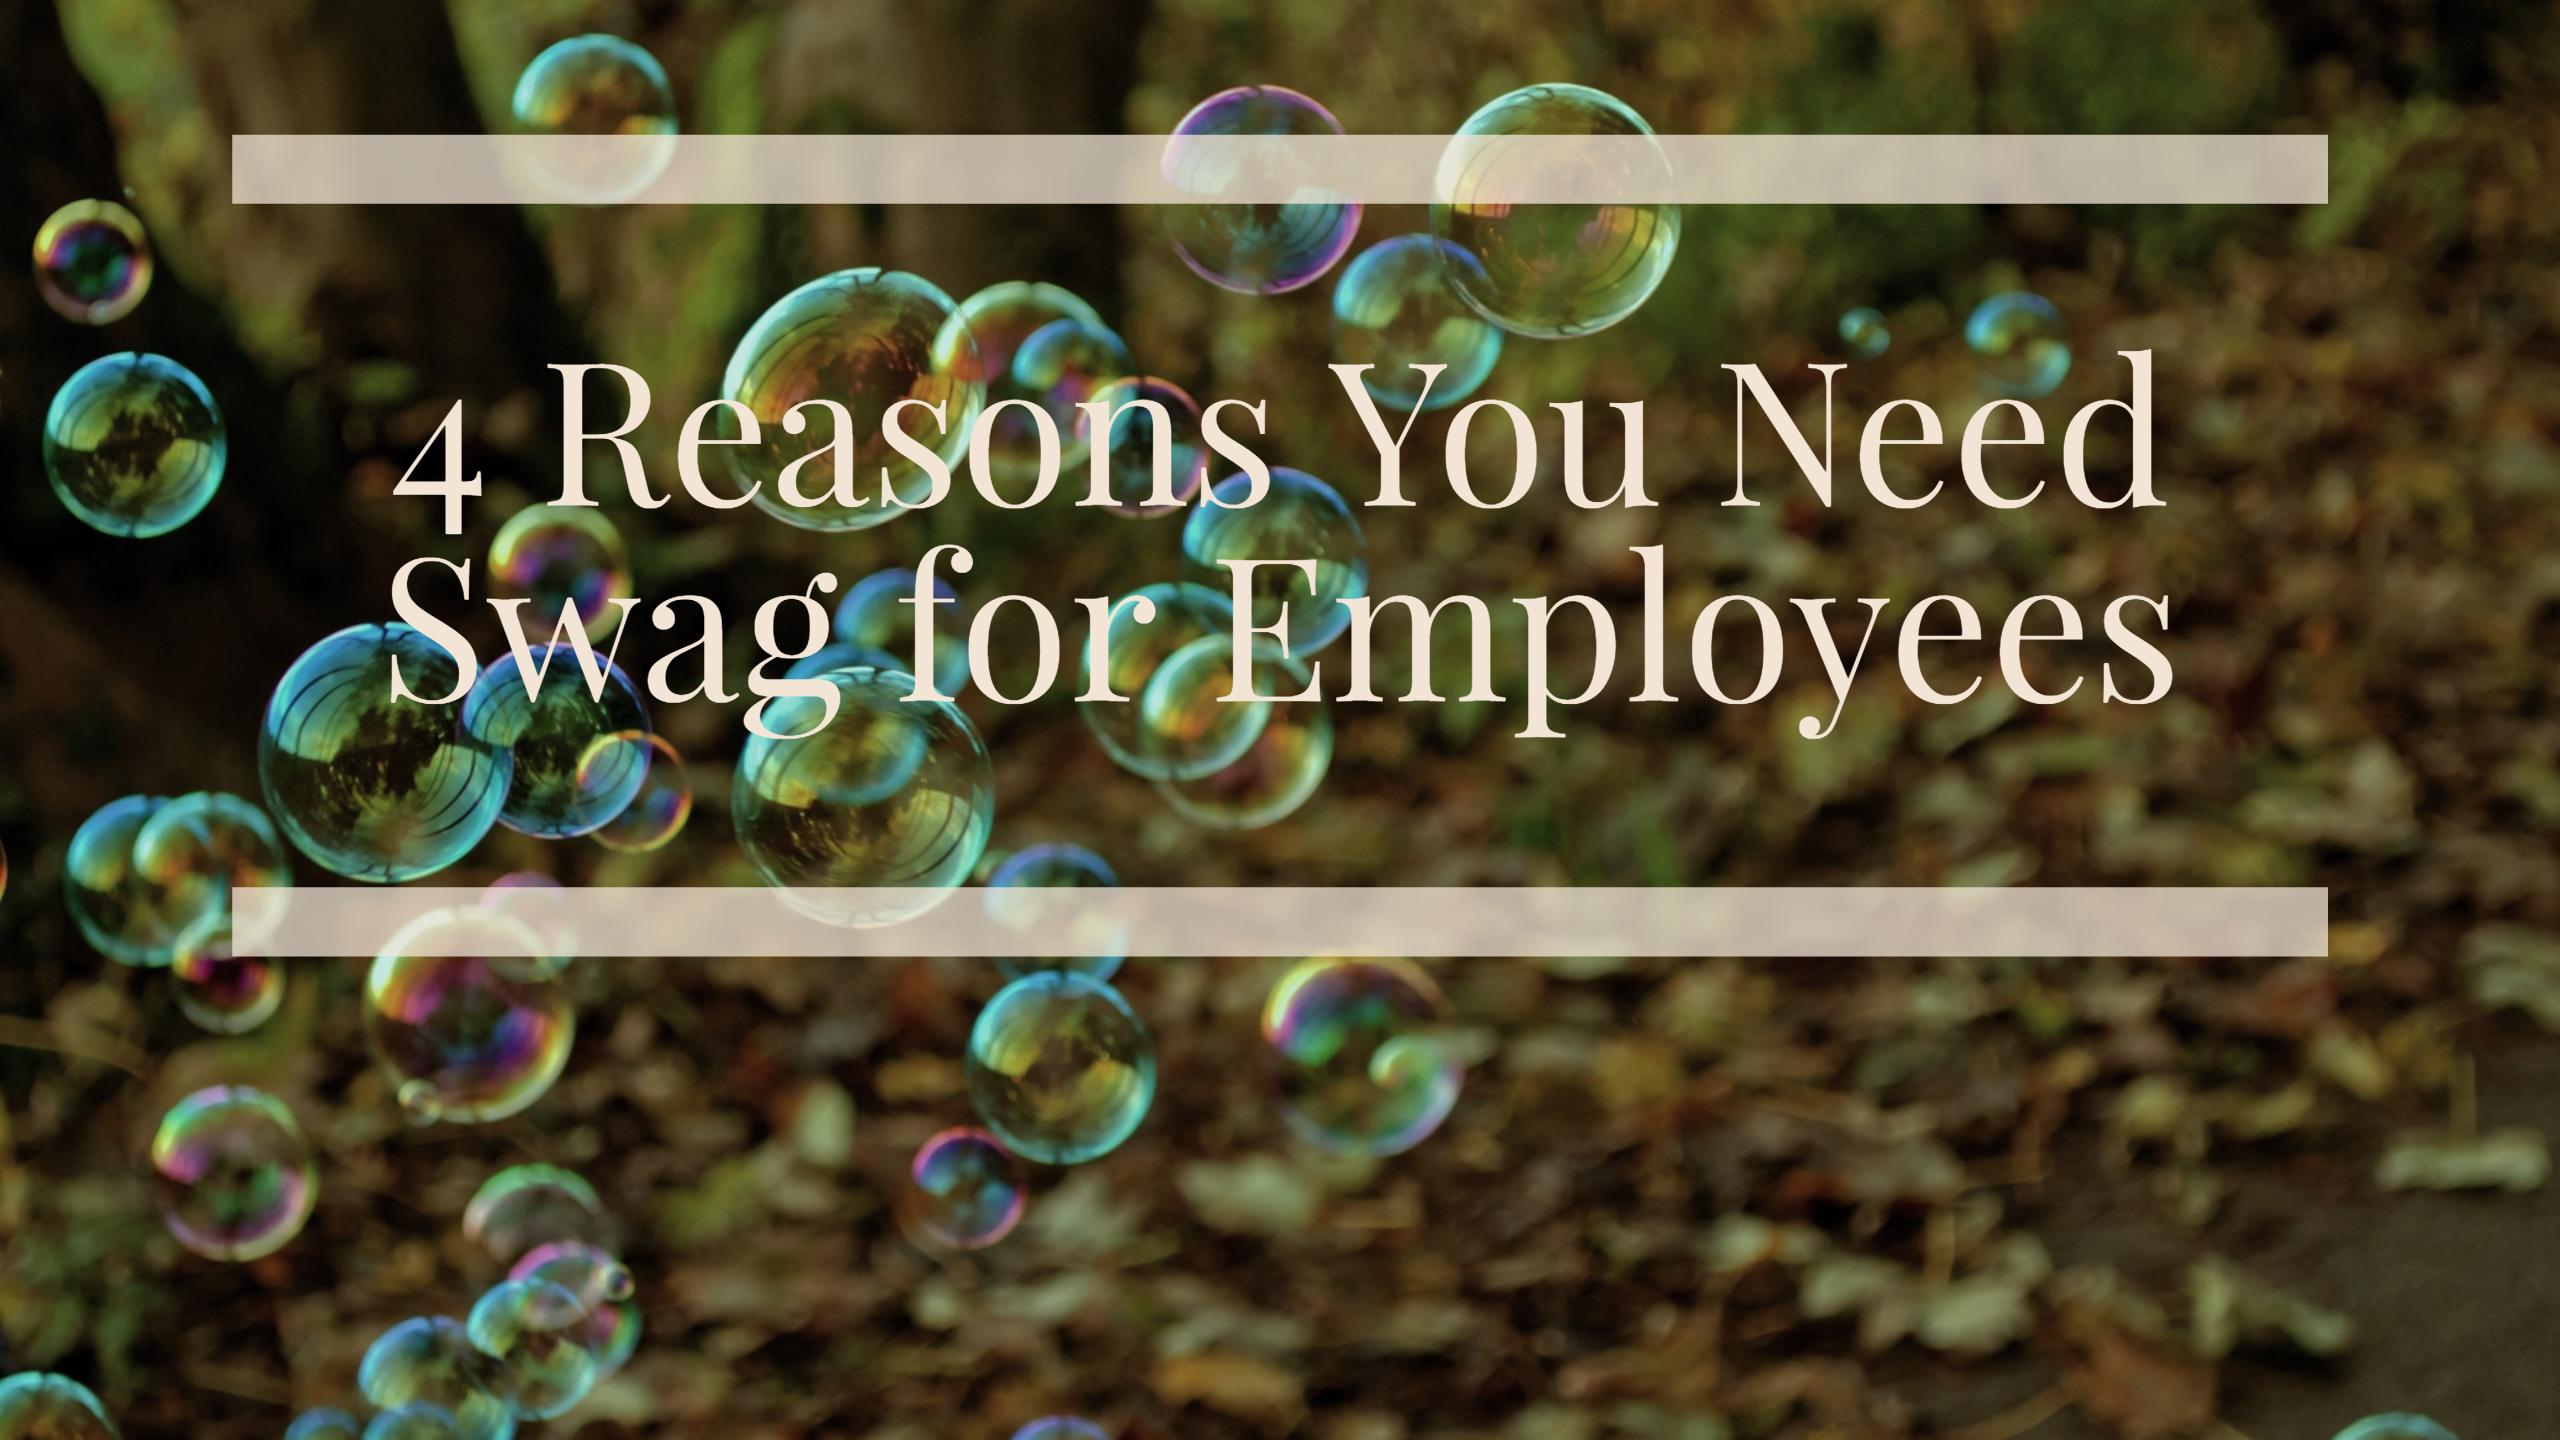 4 Reasons You Need Swag for Employees